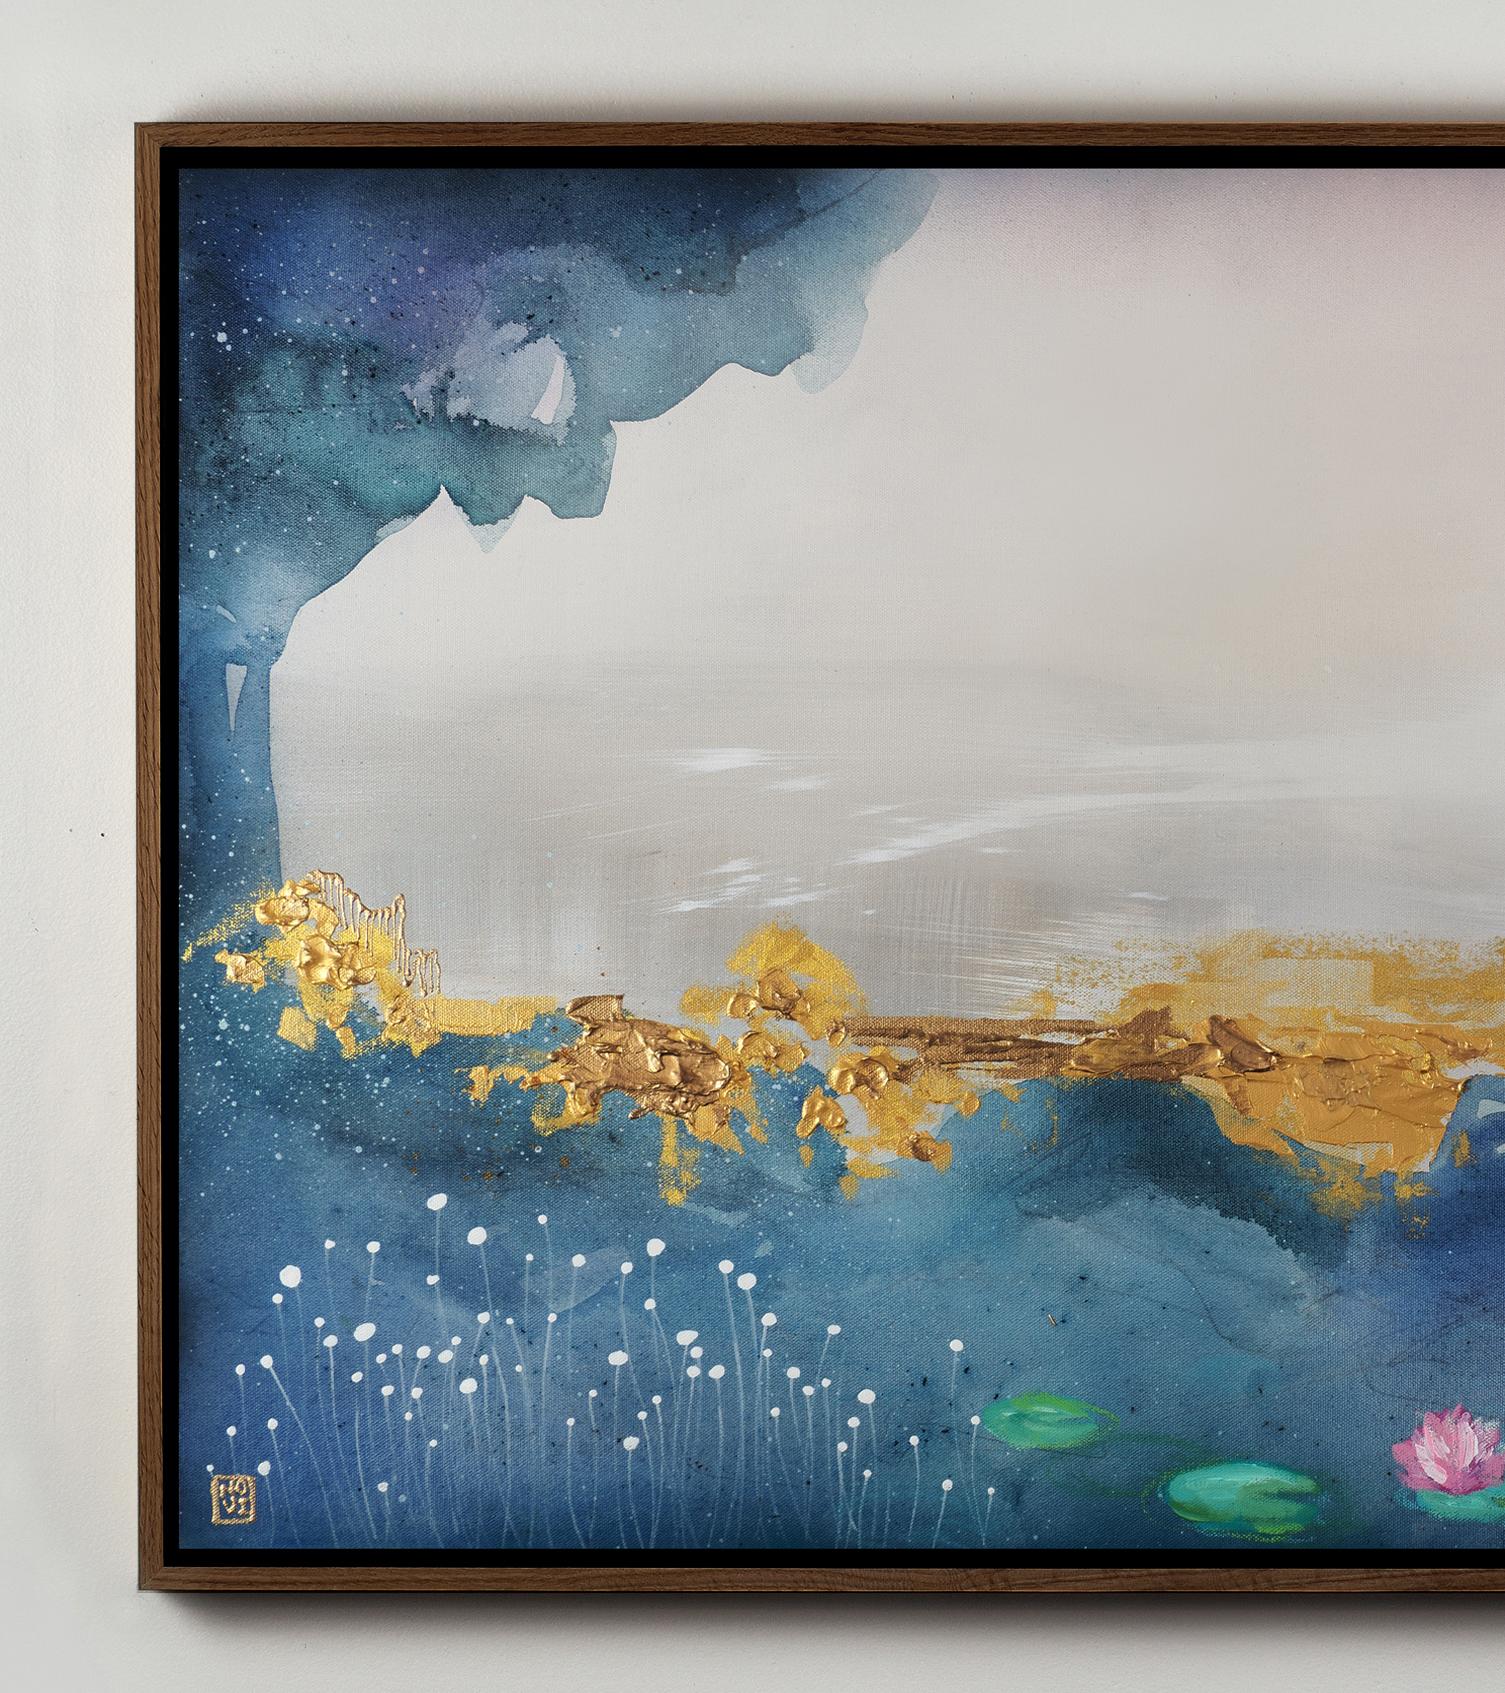 The Art of Dreaming II, Original Framed Signed Contemporary Abstract Landscape - Painting by Novi Lim